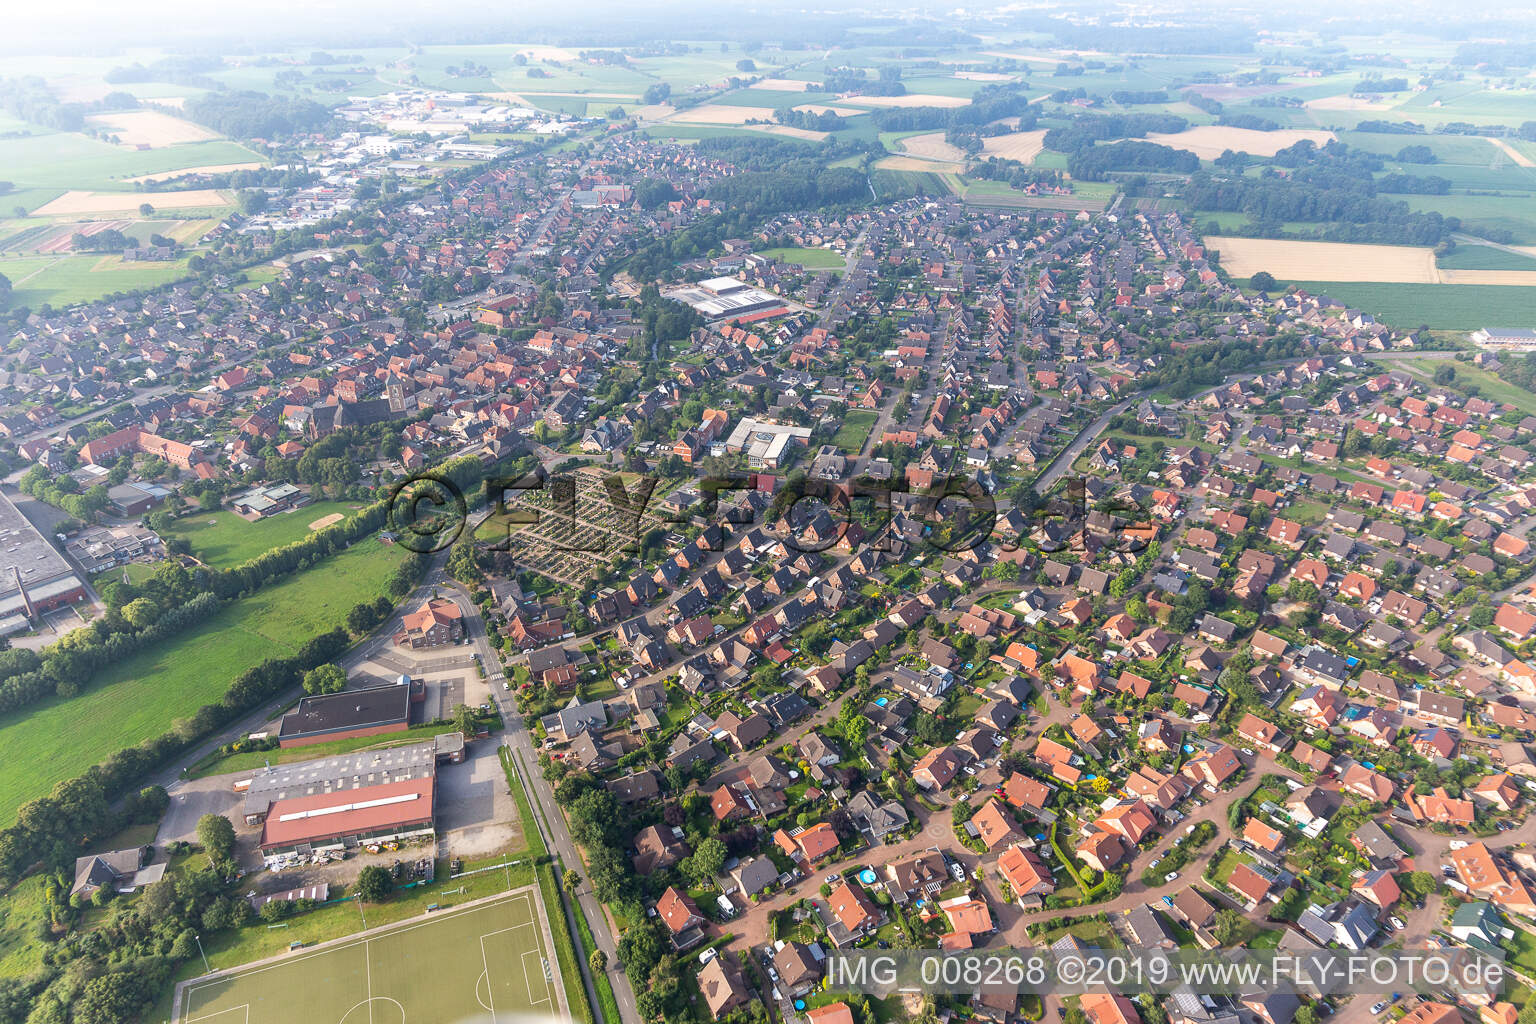 Ramsdorf in the state North Rhine-Westphalia, Germany from above